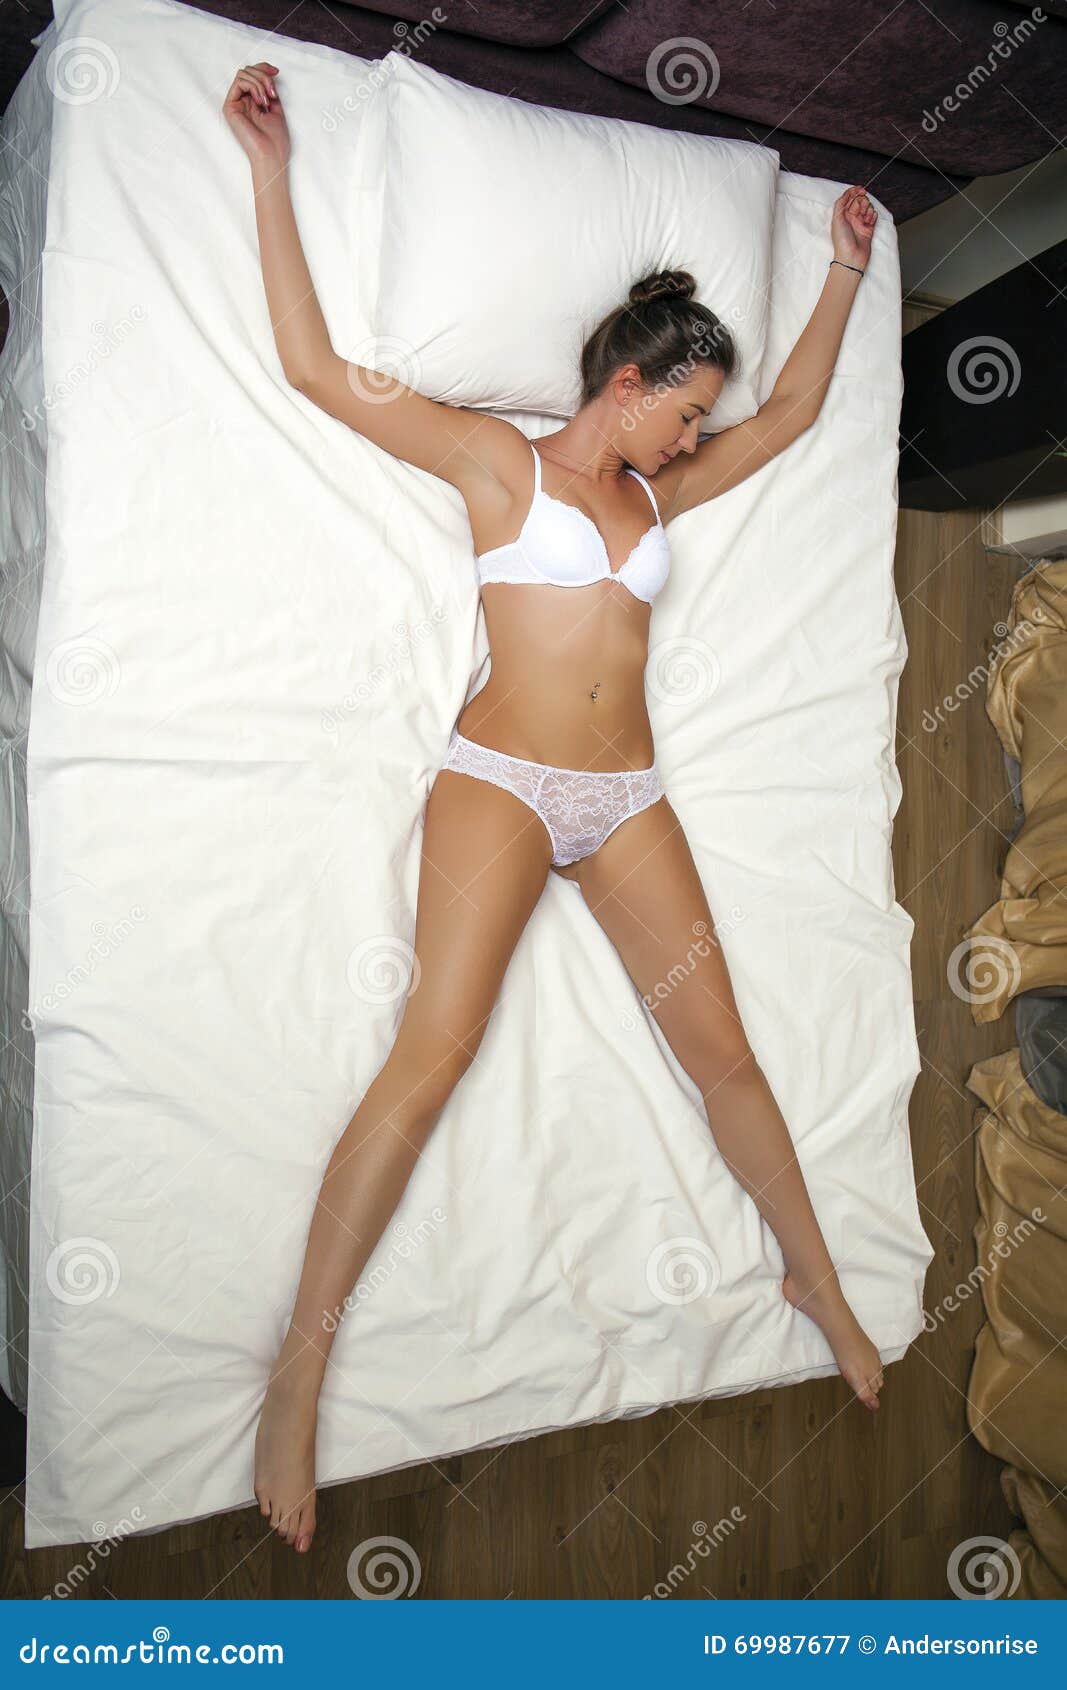 https://thumbs.dreamstime.com/z/sleeping-positions-young-woman-white-underwear-sleeping-double-bed-69987677.jpg